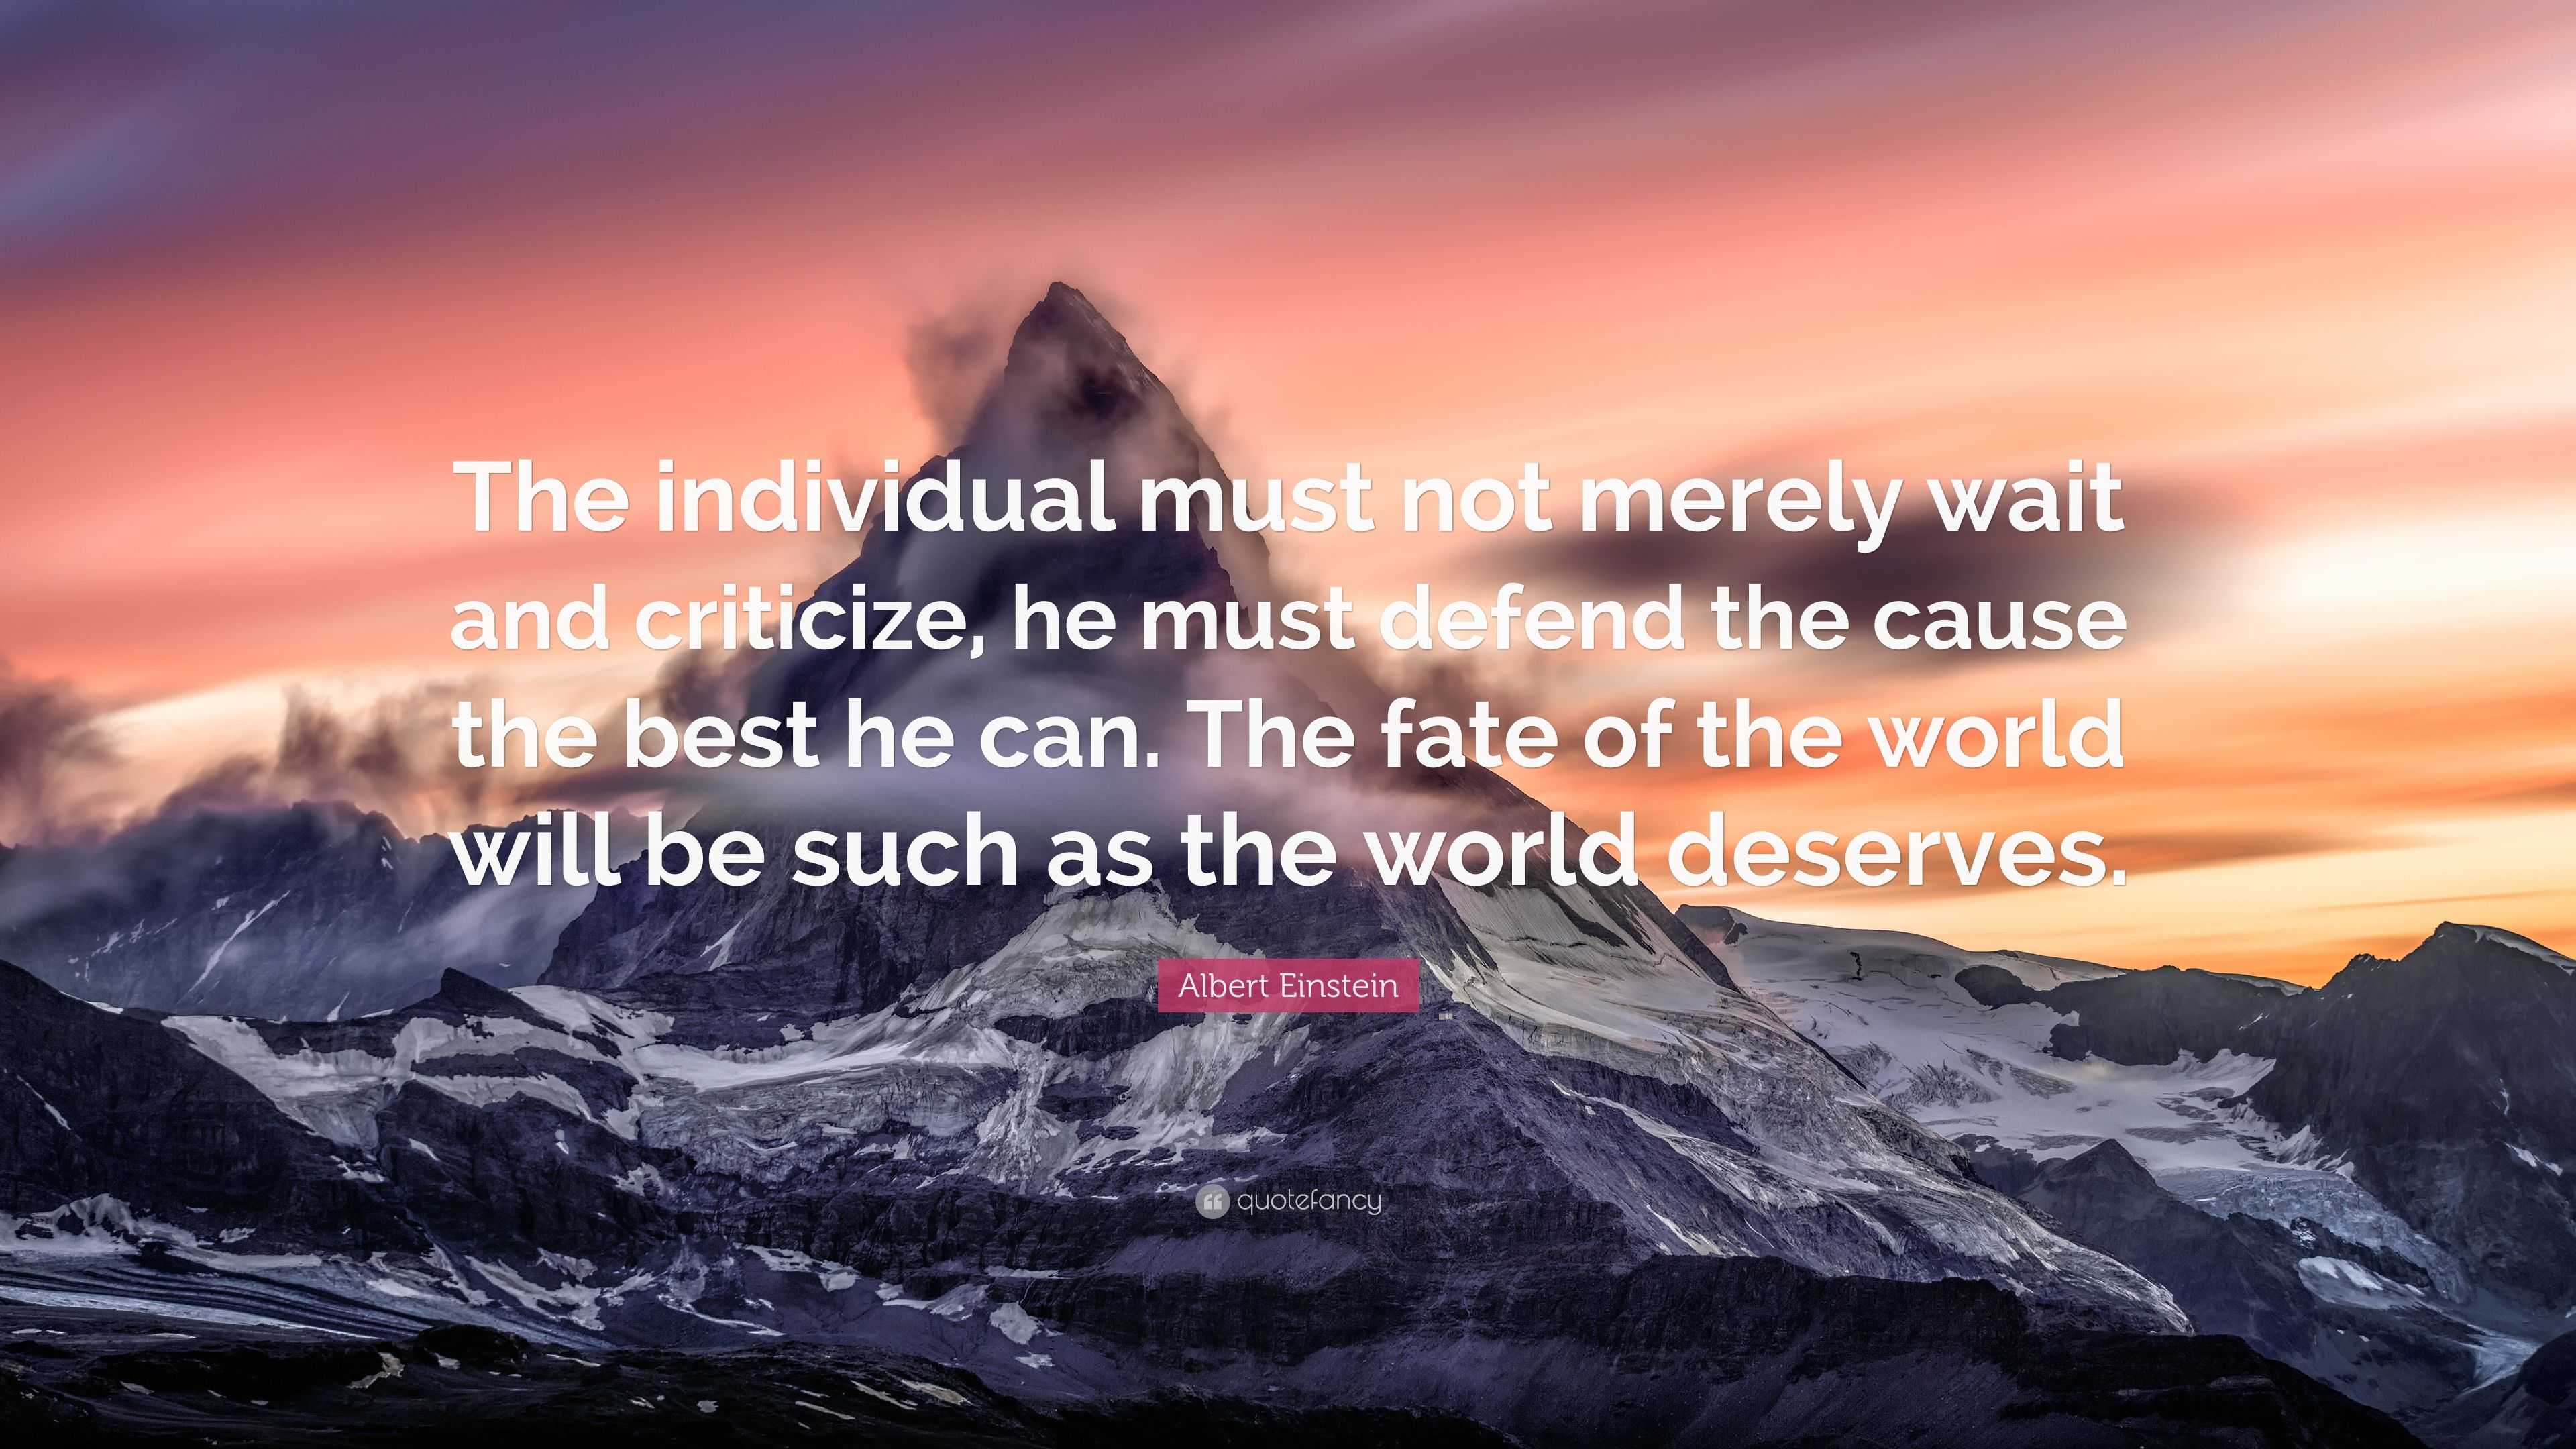 Albert Einstein Quote: “The individual must not merely wait and ...